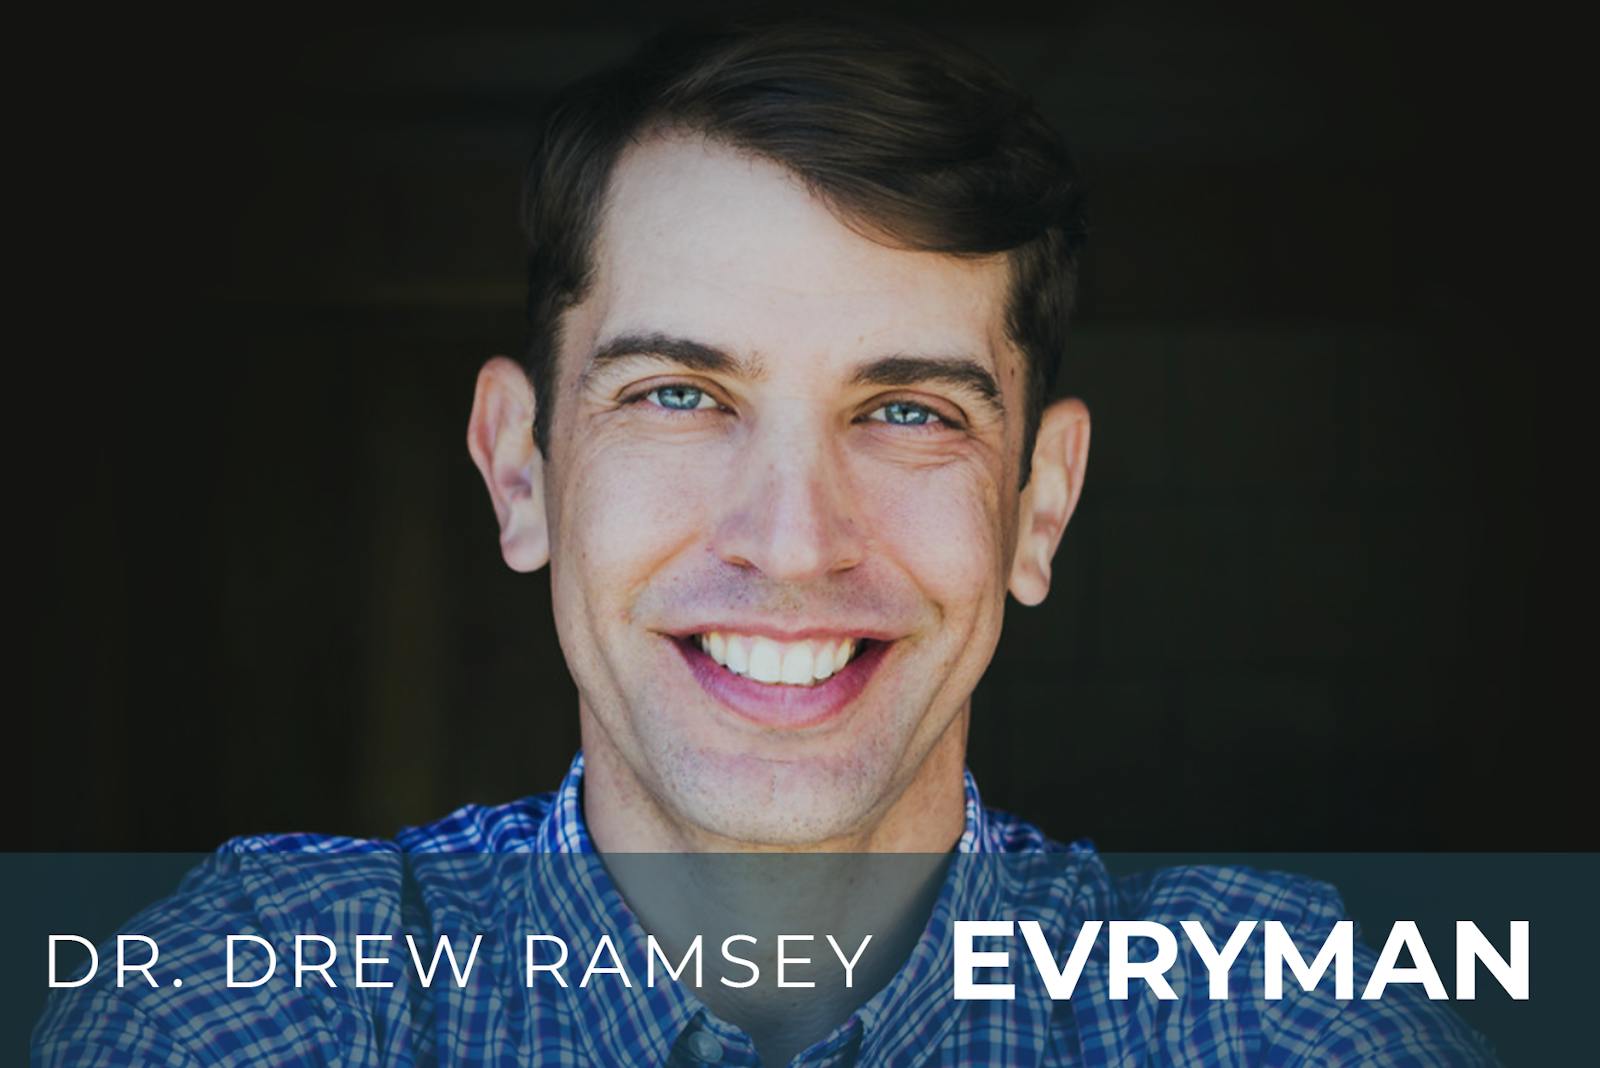 Building Mental Health With Food - Evryman Global Community Call With Dr. Drew Ramsey